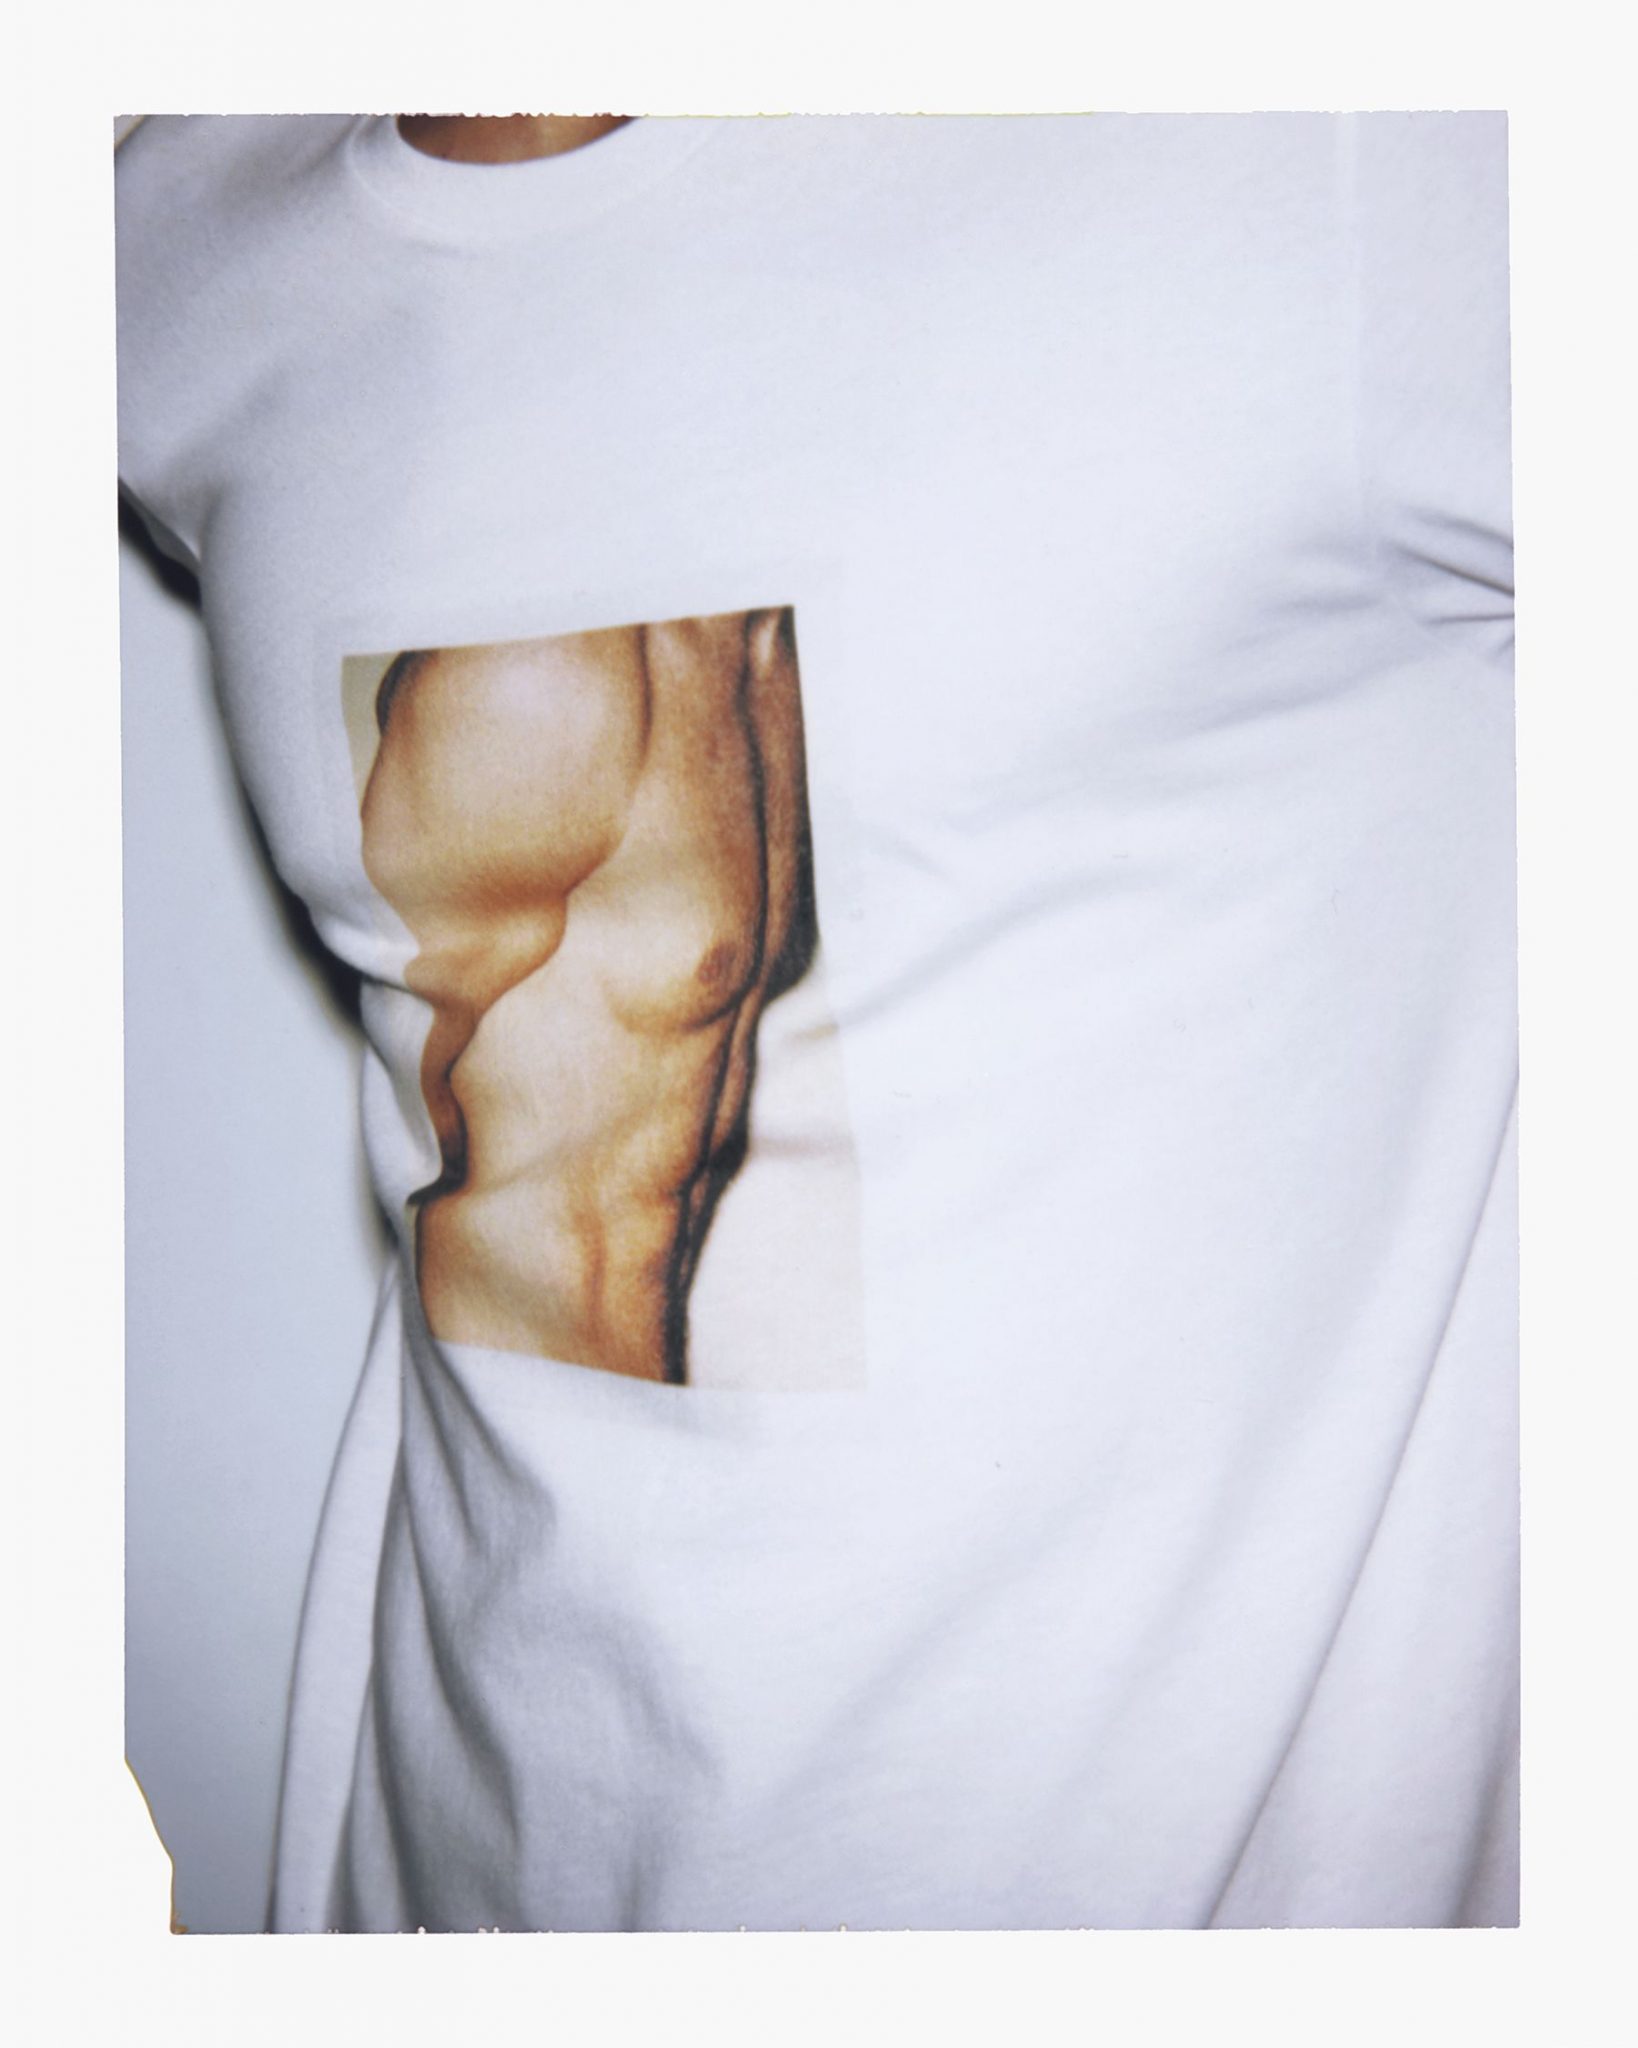 forget #mycalvins: your ck underwear was just turned into art